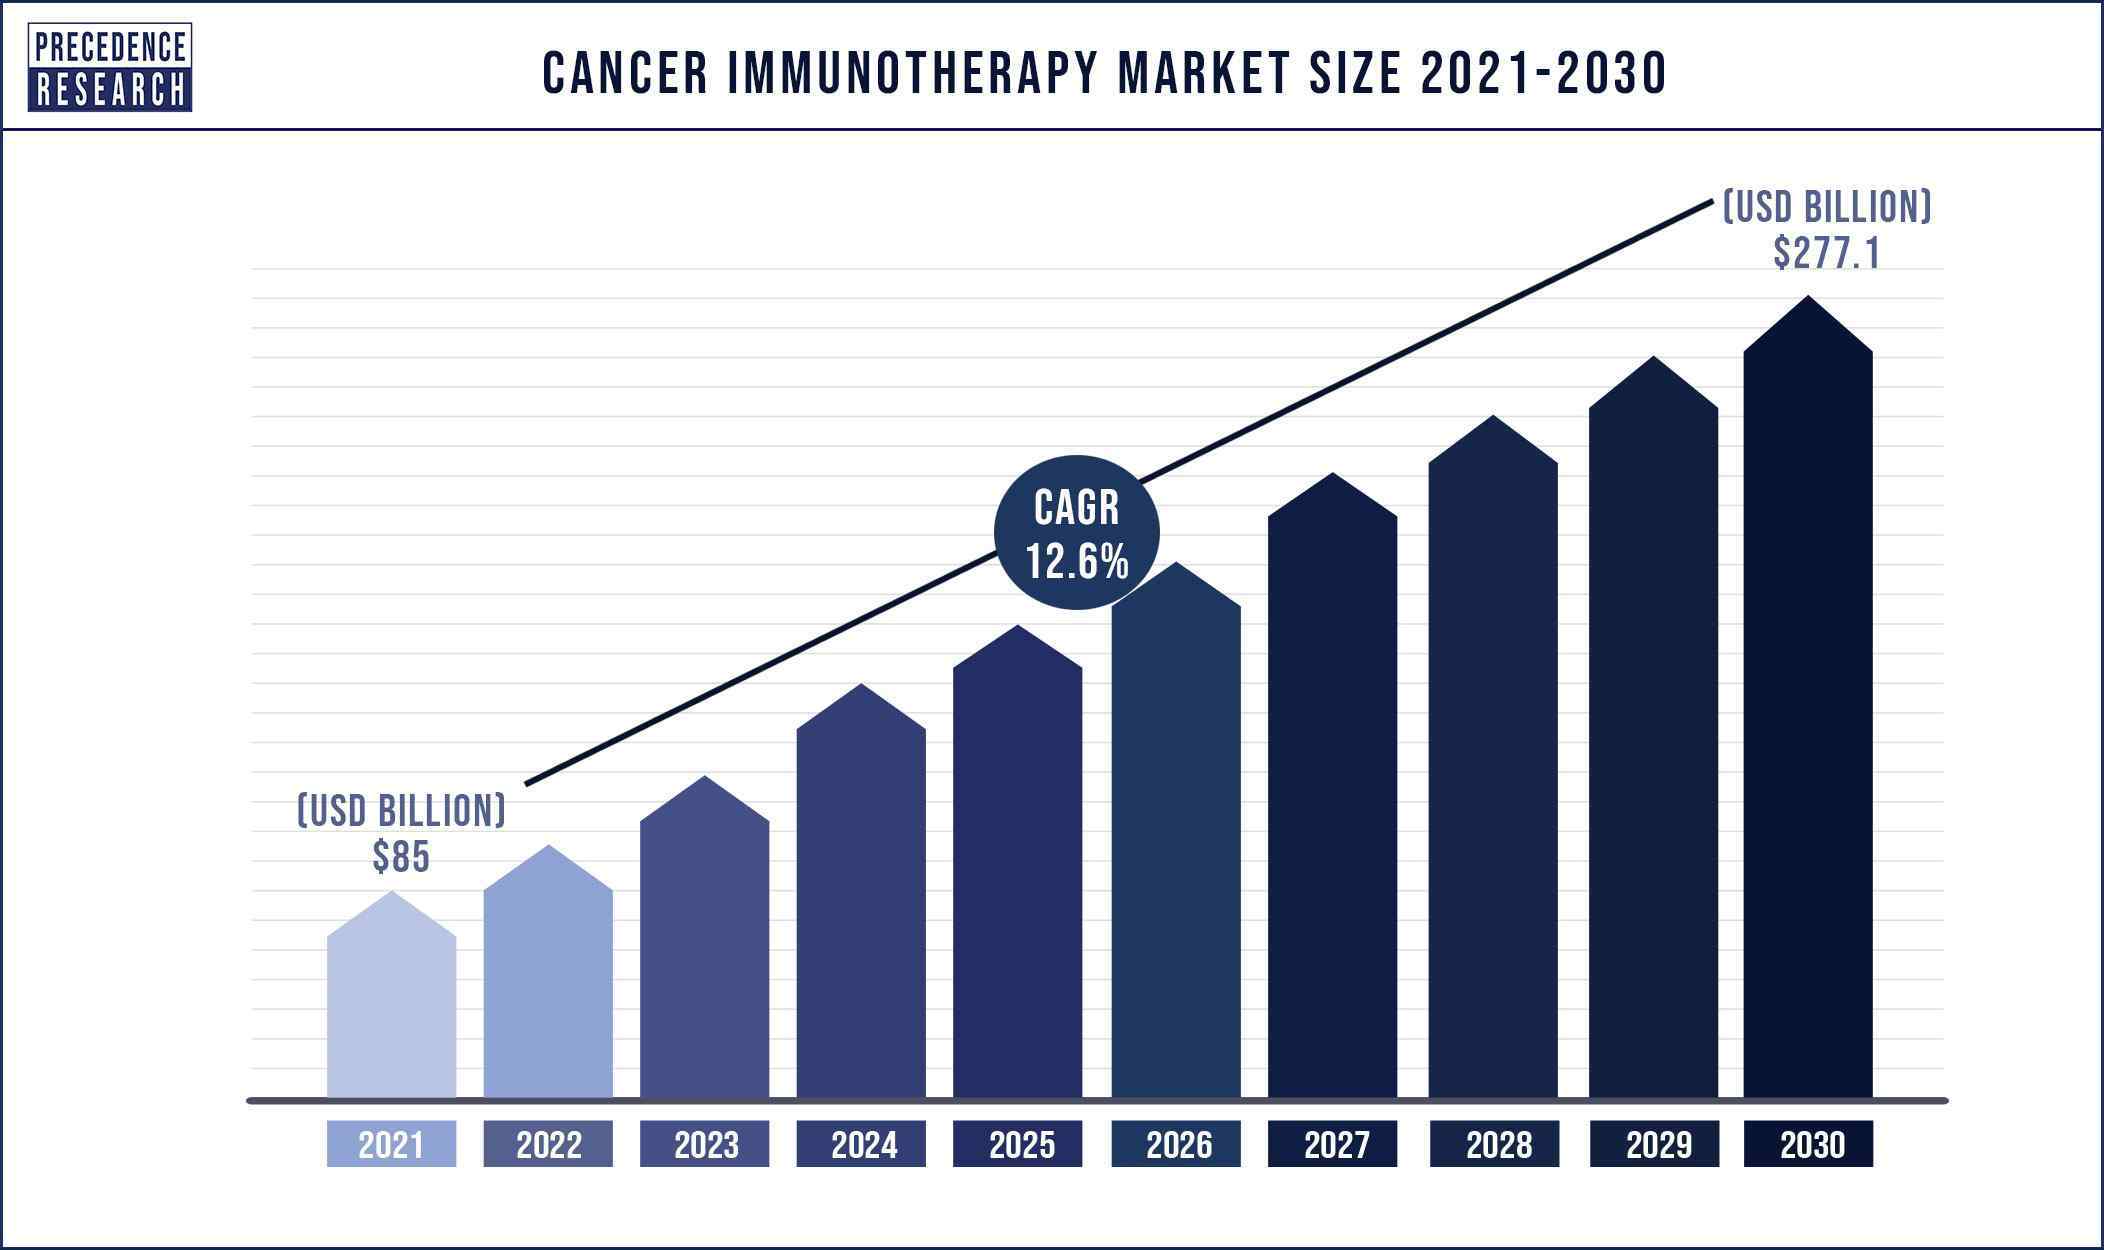 Cancer Immunotherapy Market Size 2022 to 2030